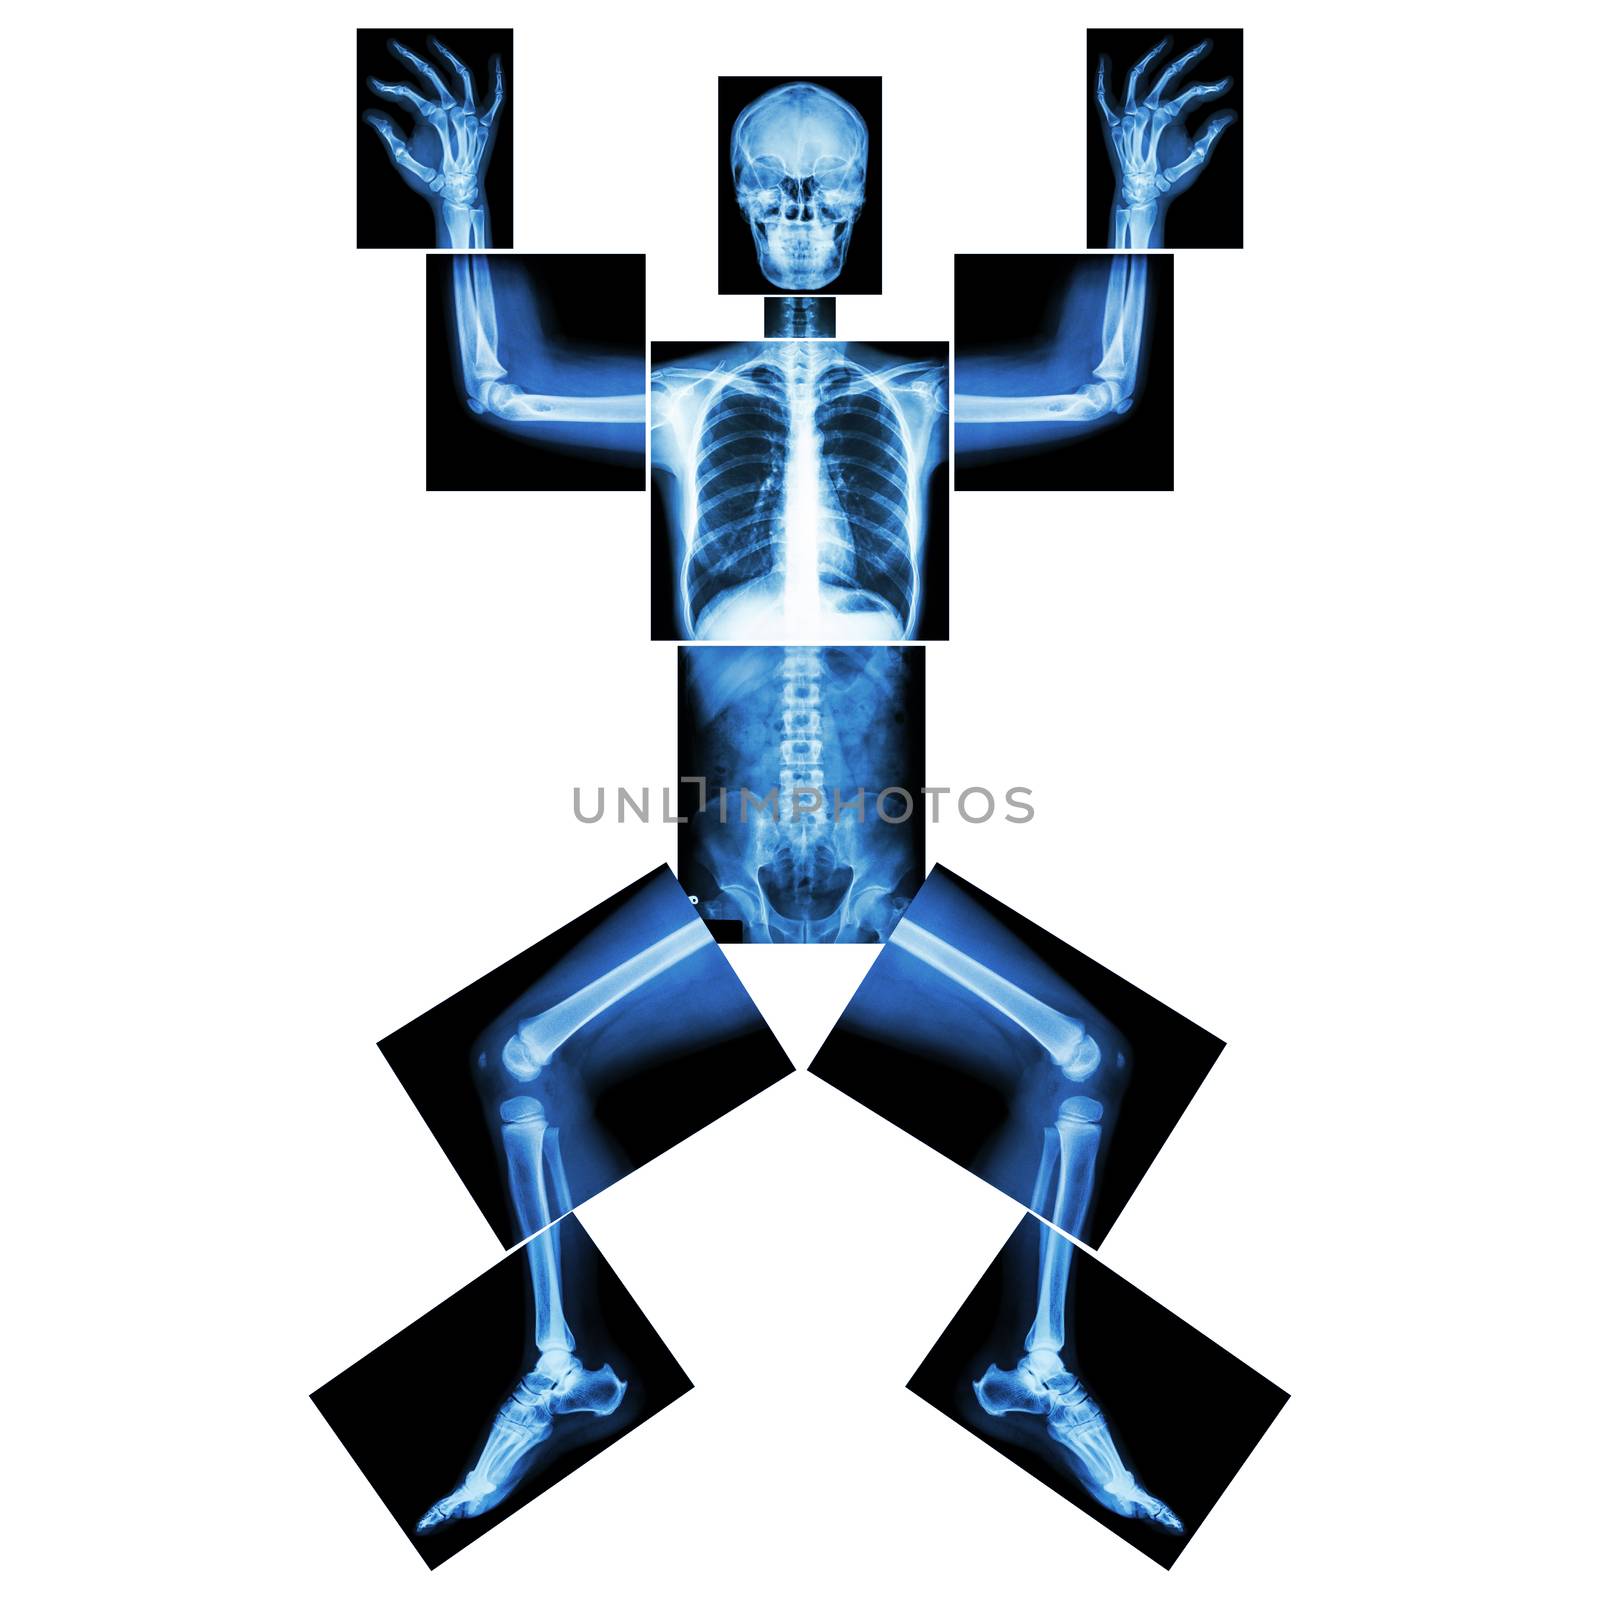 Jigsaw human x-ray ( whole body : head skull face neck spine shoulder arm elbow joint forearm wrist hand finger chest thorax heart lung rib abdomen back pelvis hip thigh knee leg ankle foot heel toe ) by stockdevil